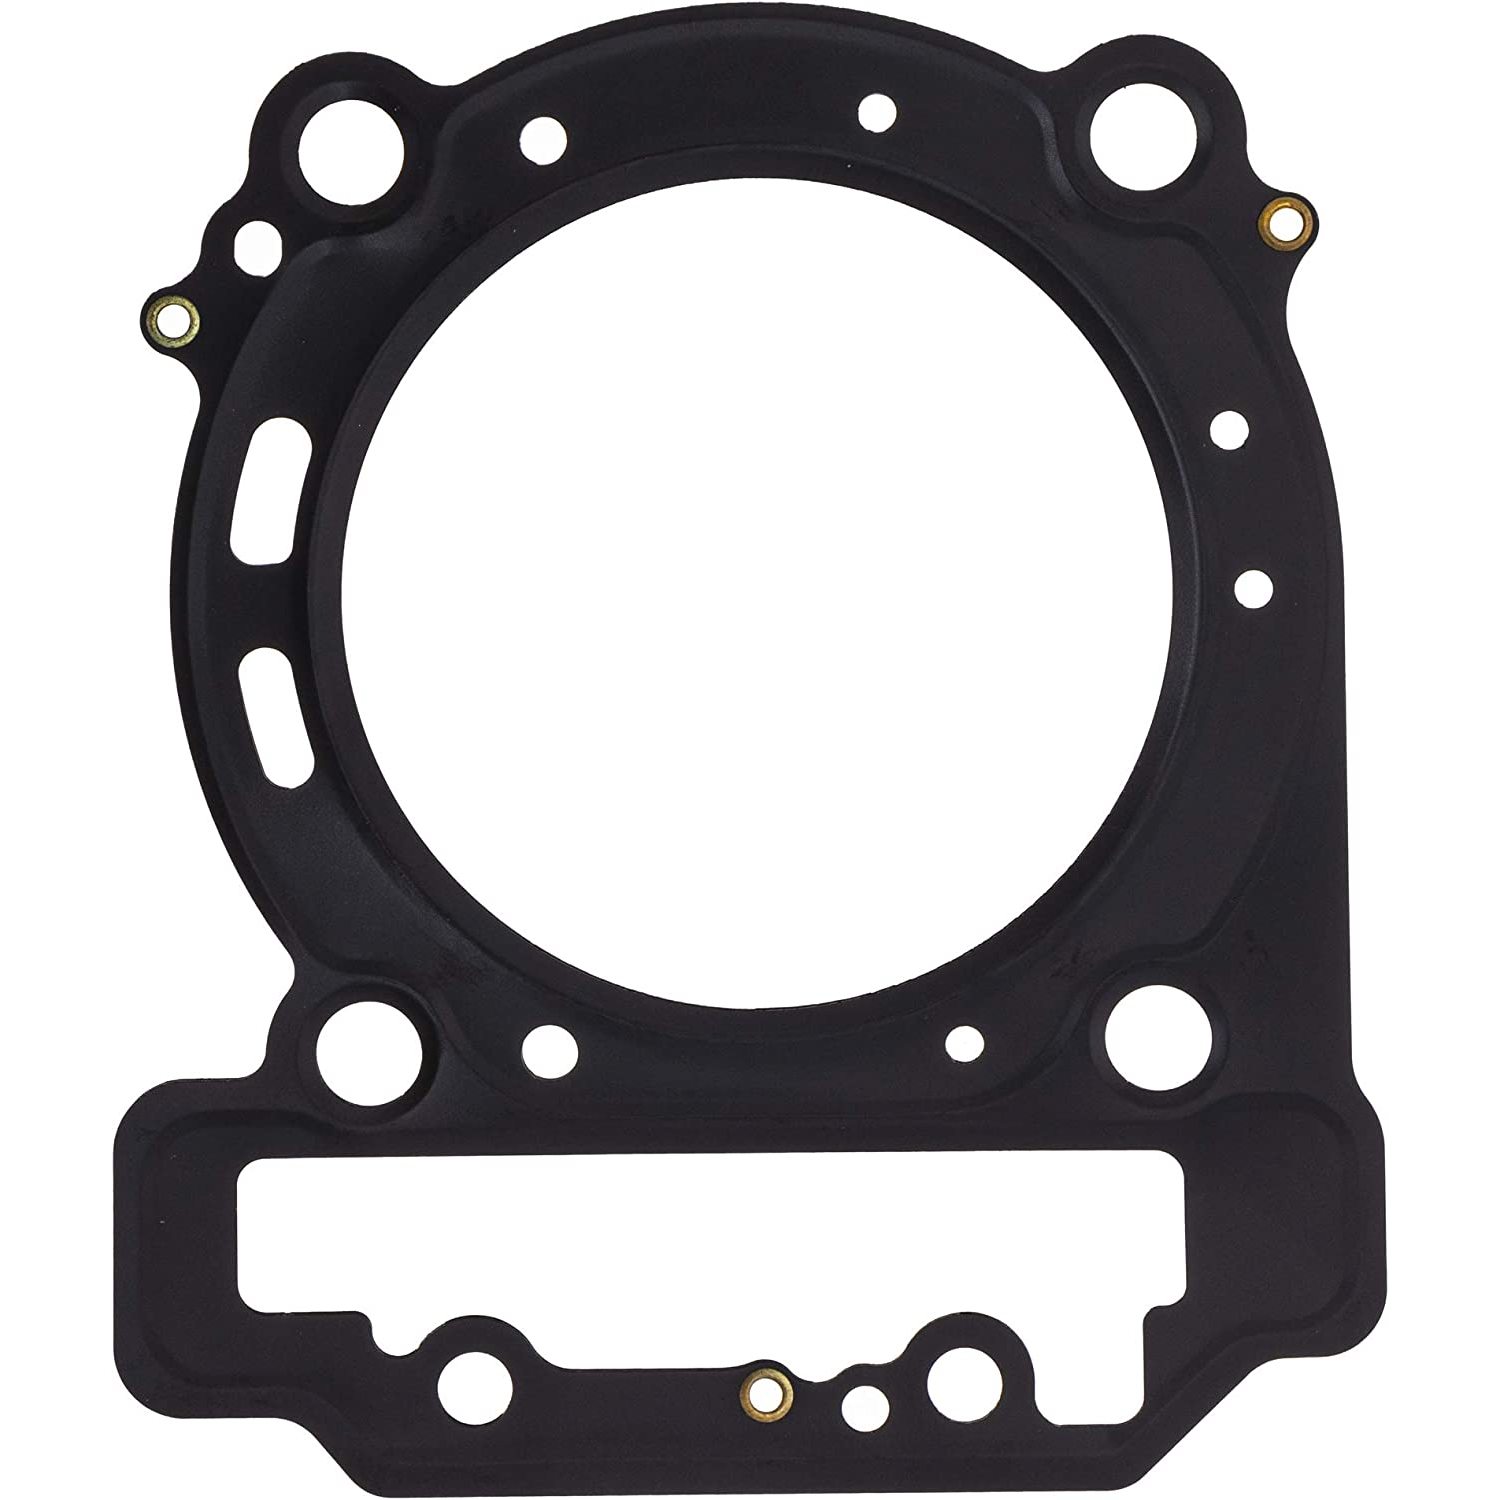 NICHE Cylinder Head and Base Gasket Kit Set Combo For 2003-2017 Ski-Doo Renegade Can-Am Commander 420630195 420630850, Base Gasket Replaces OEM Part Numbe... - image 4 of 4